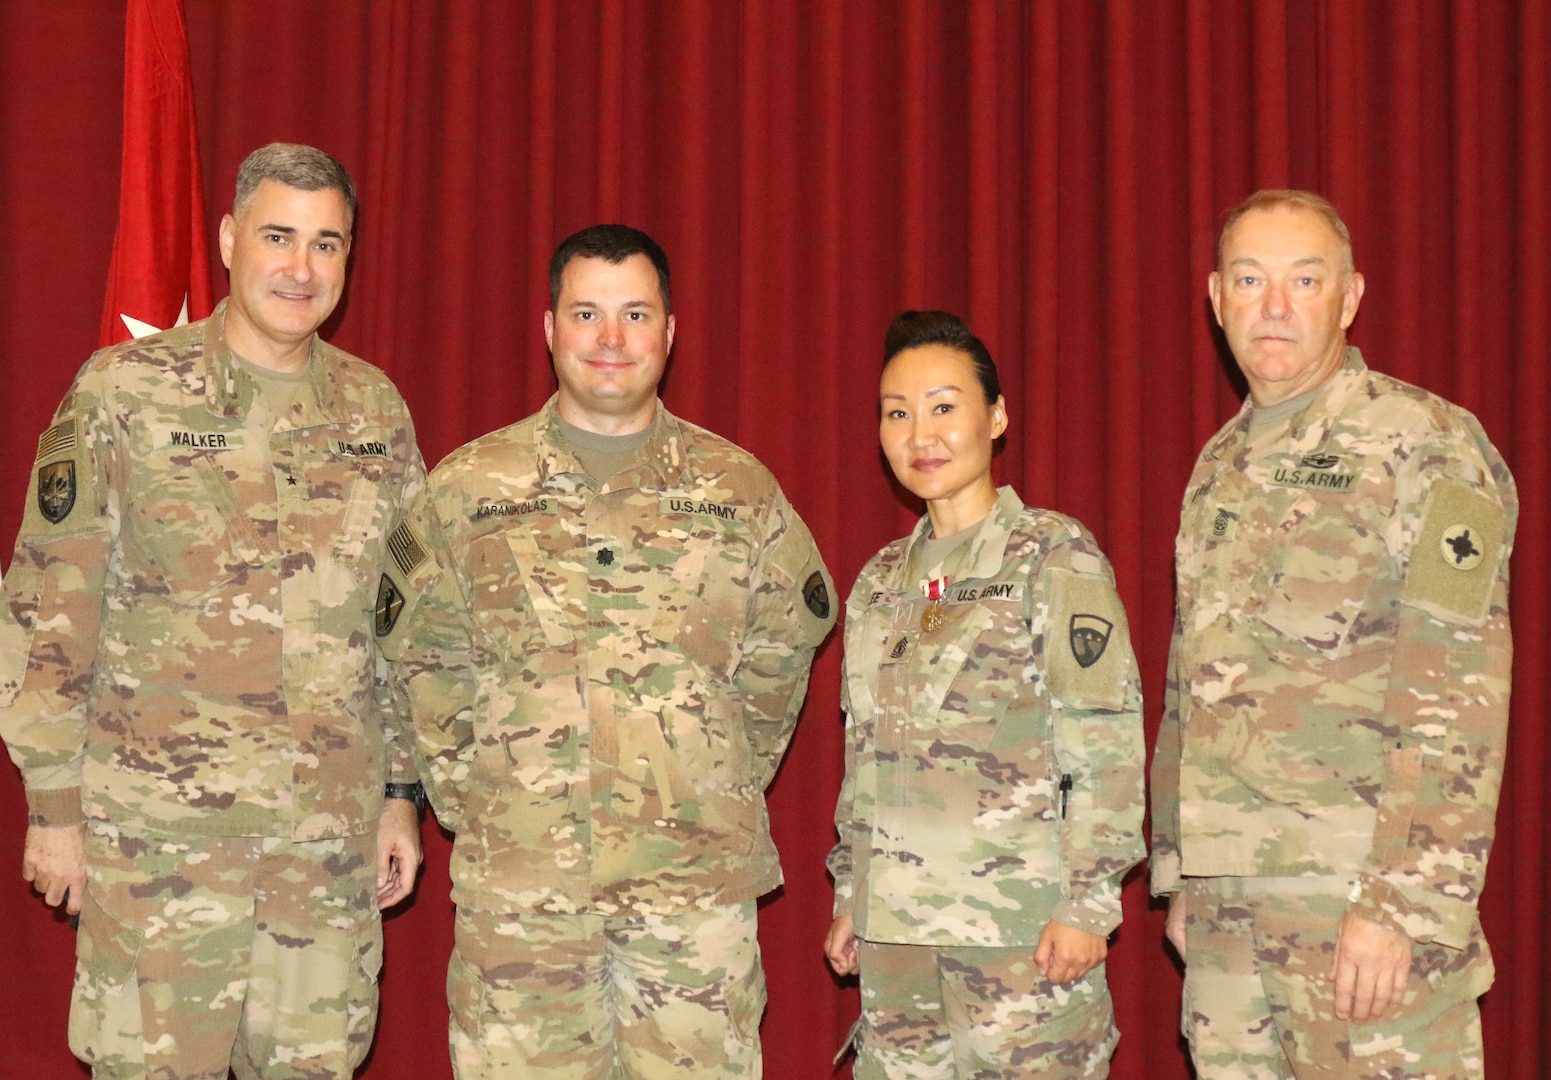 Brig. Gen. Clint E. Walker, commanding general of 184th Sustainment Command, Lt. Col. Leo Karanikolas, 420th Transportation Battalion, 1st Sgt. Sun Lee, 420th, and Command Sgt. Maj. Jason Little, 184th, after a transfer of authority ceremony at Camp Arifjan, Kuwait, April 25, 2019. The Sherman Oaks, Calif. based 420th officially transfers authority of the theater movement control battalion mission to the Manhattan, Kan. based 450th Transportation Battalion on April 28, 2019.